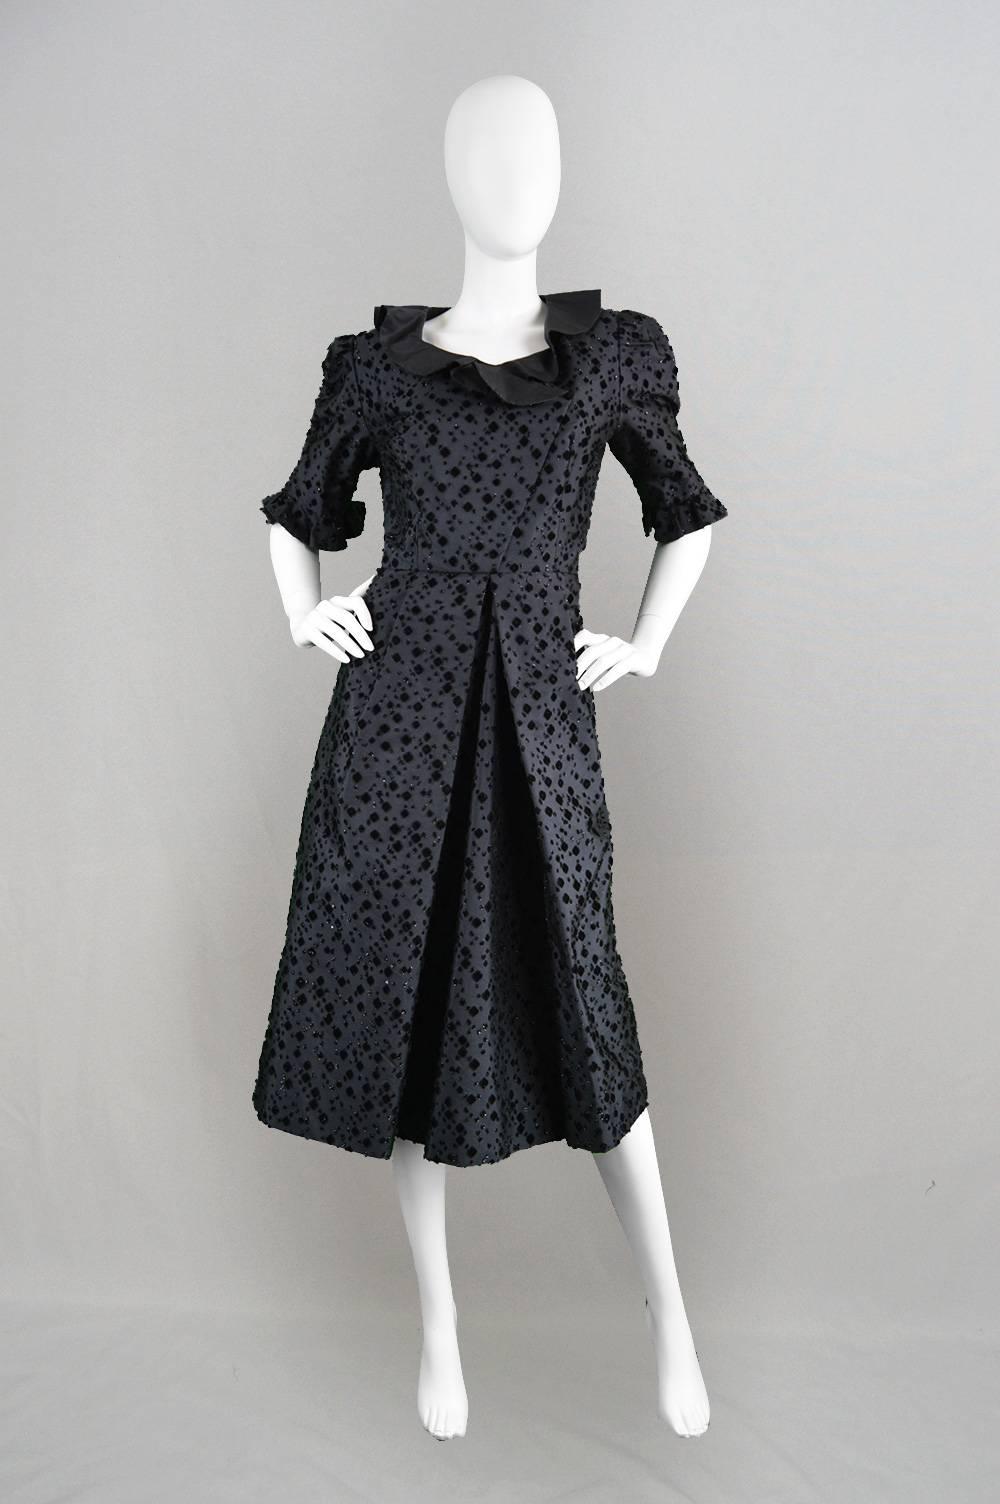 An elegant and sophisticated vintage couture dress from the 1960s by Roger Brinés. An incredible tailor, the French born Roger Brines worked for Digby Morton during the 40s and 50s, before opening his own couture house in London in 1965. In a